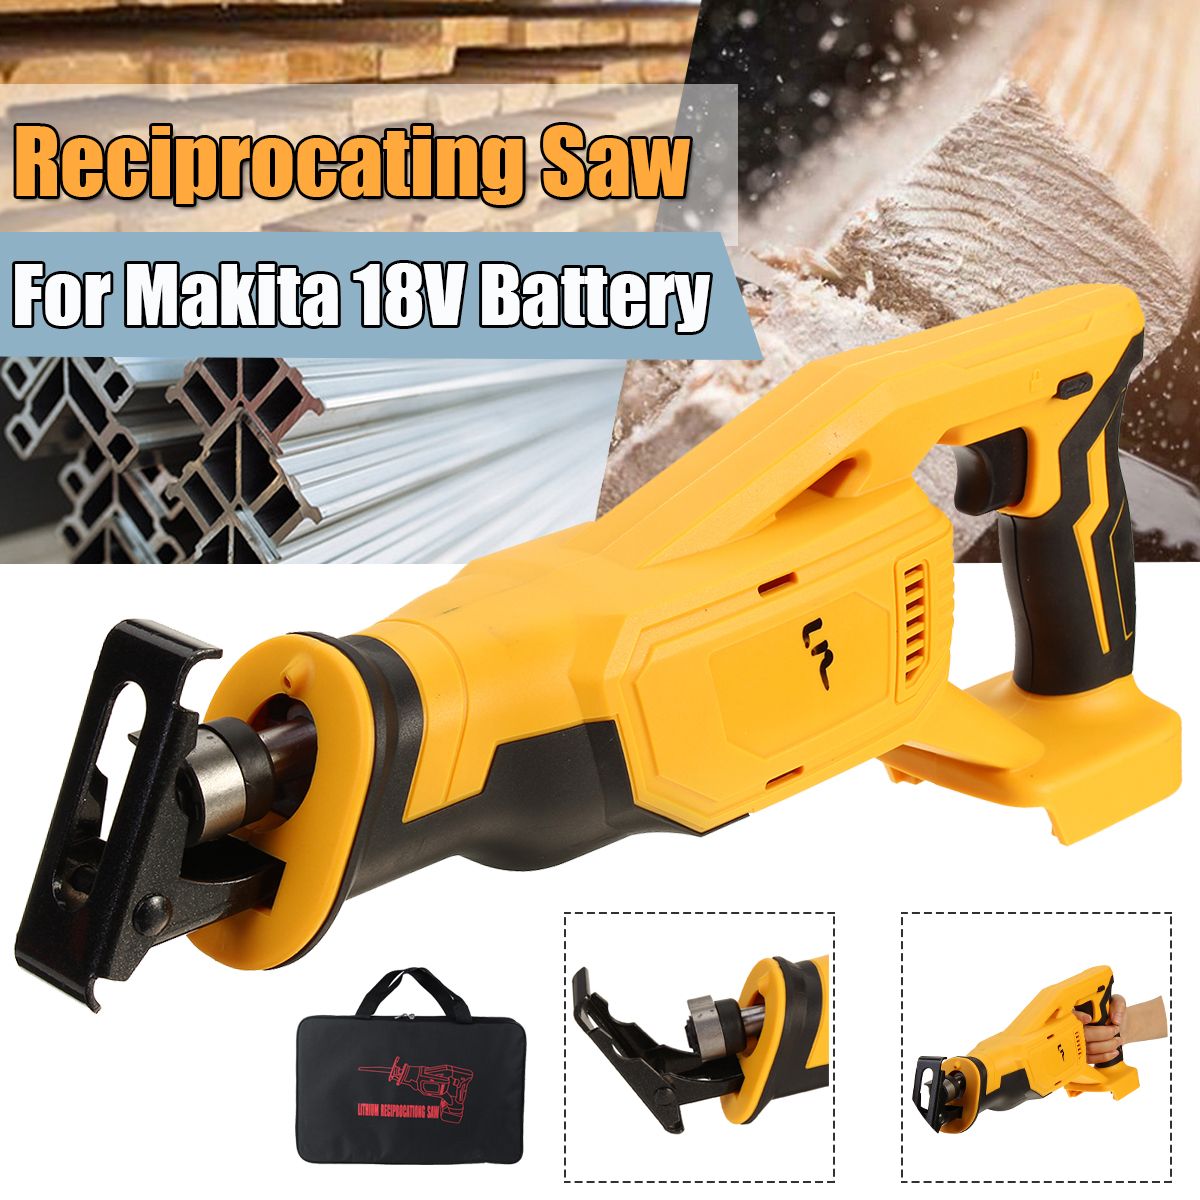 Electric-Reciprocating-Saw-Body-Compact-Wood-Cutting-Tool-For-Makita-18V-Battery-1743723